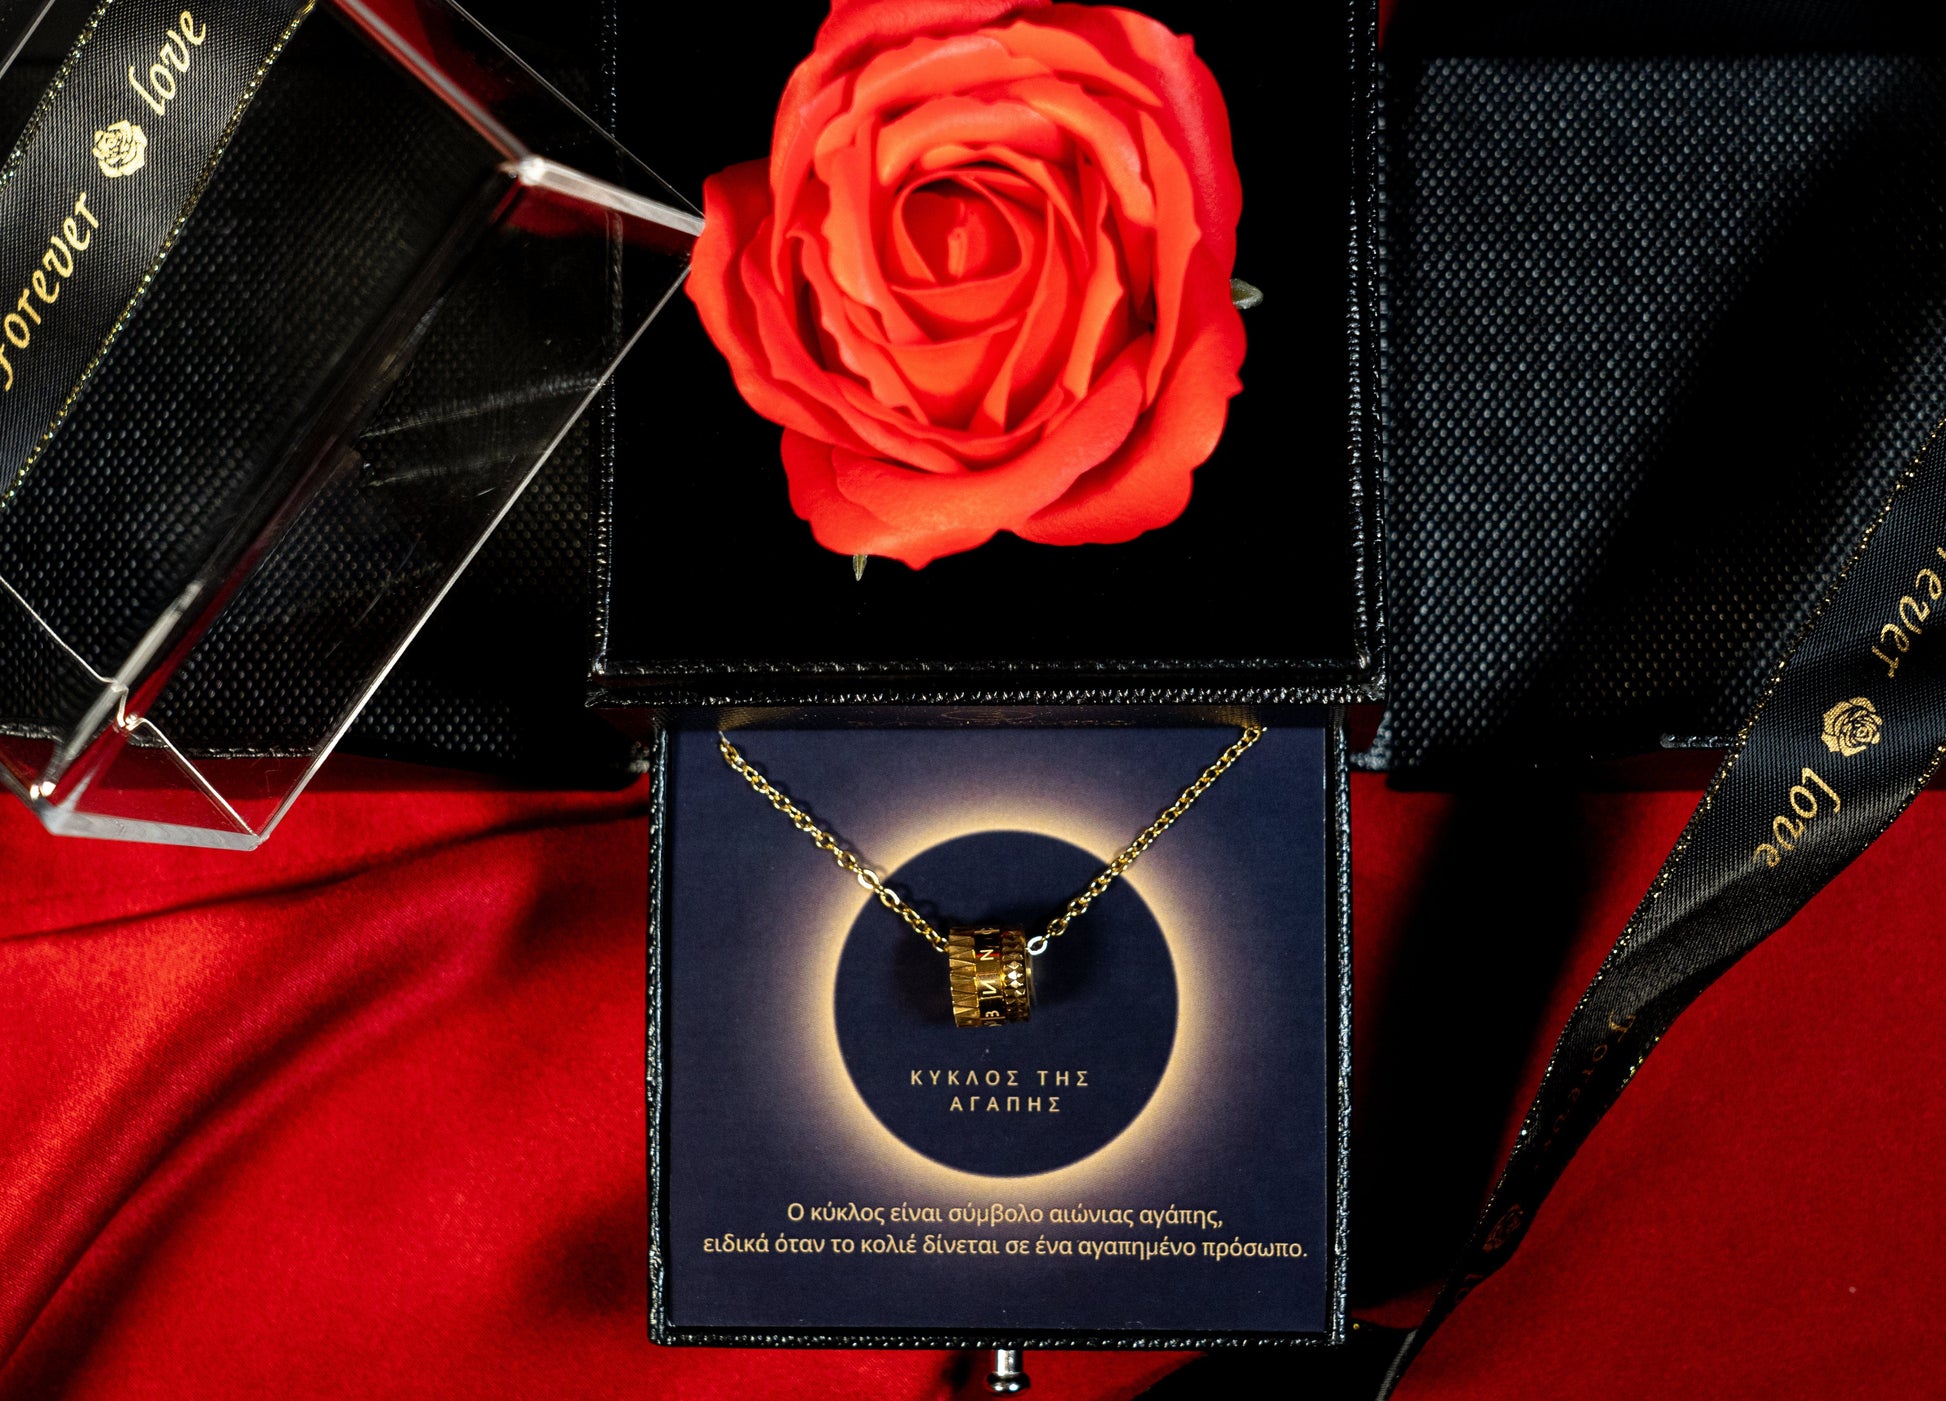 bianco rosso Rose Box Valentine's Gift Box - Circle Of Love cyprus greece jewelry gift free shipping europe worldwide